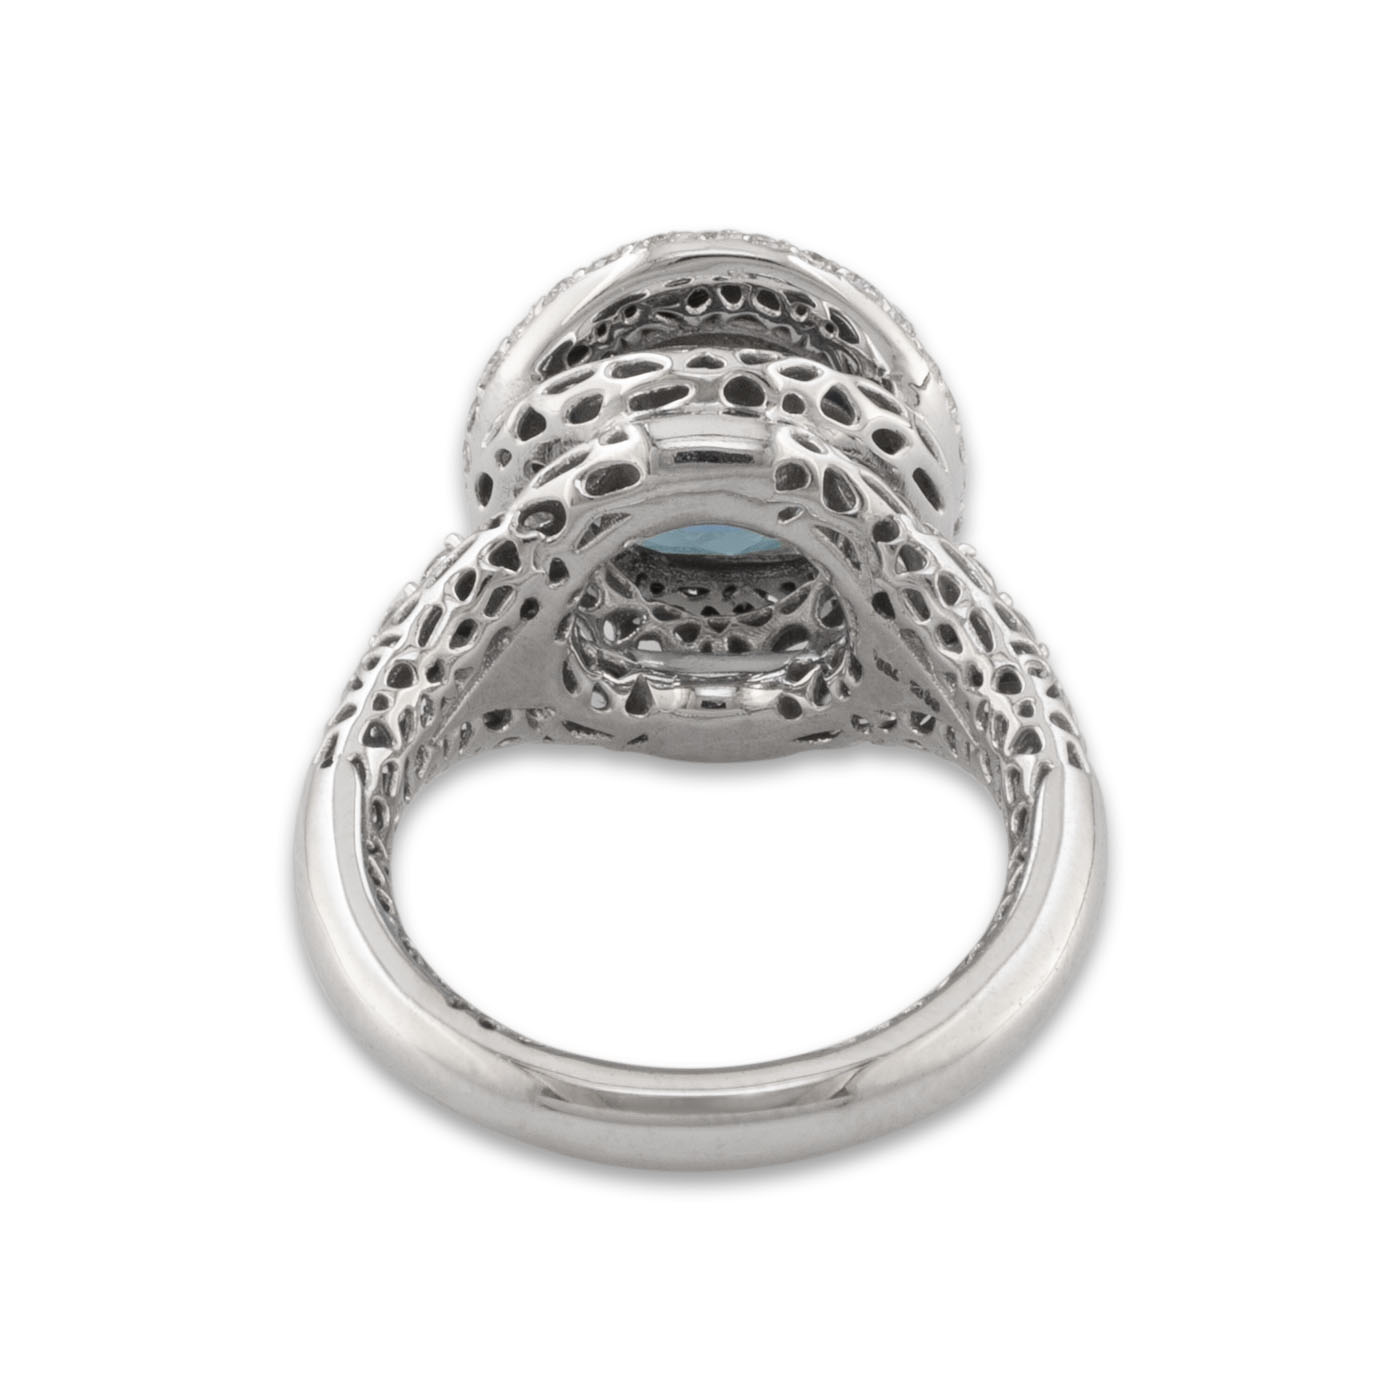 blue topaz white gold ring with diamonds